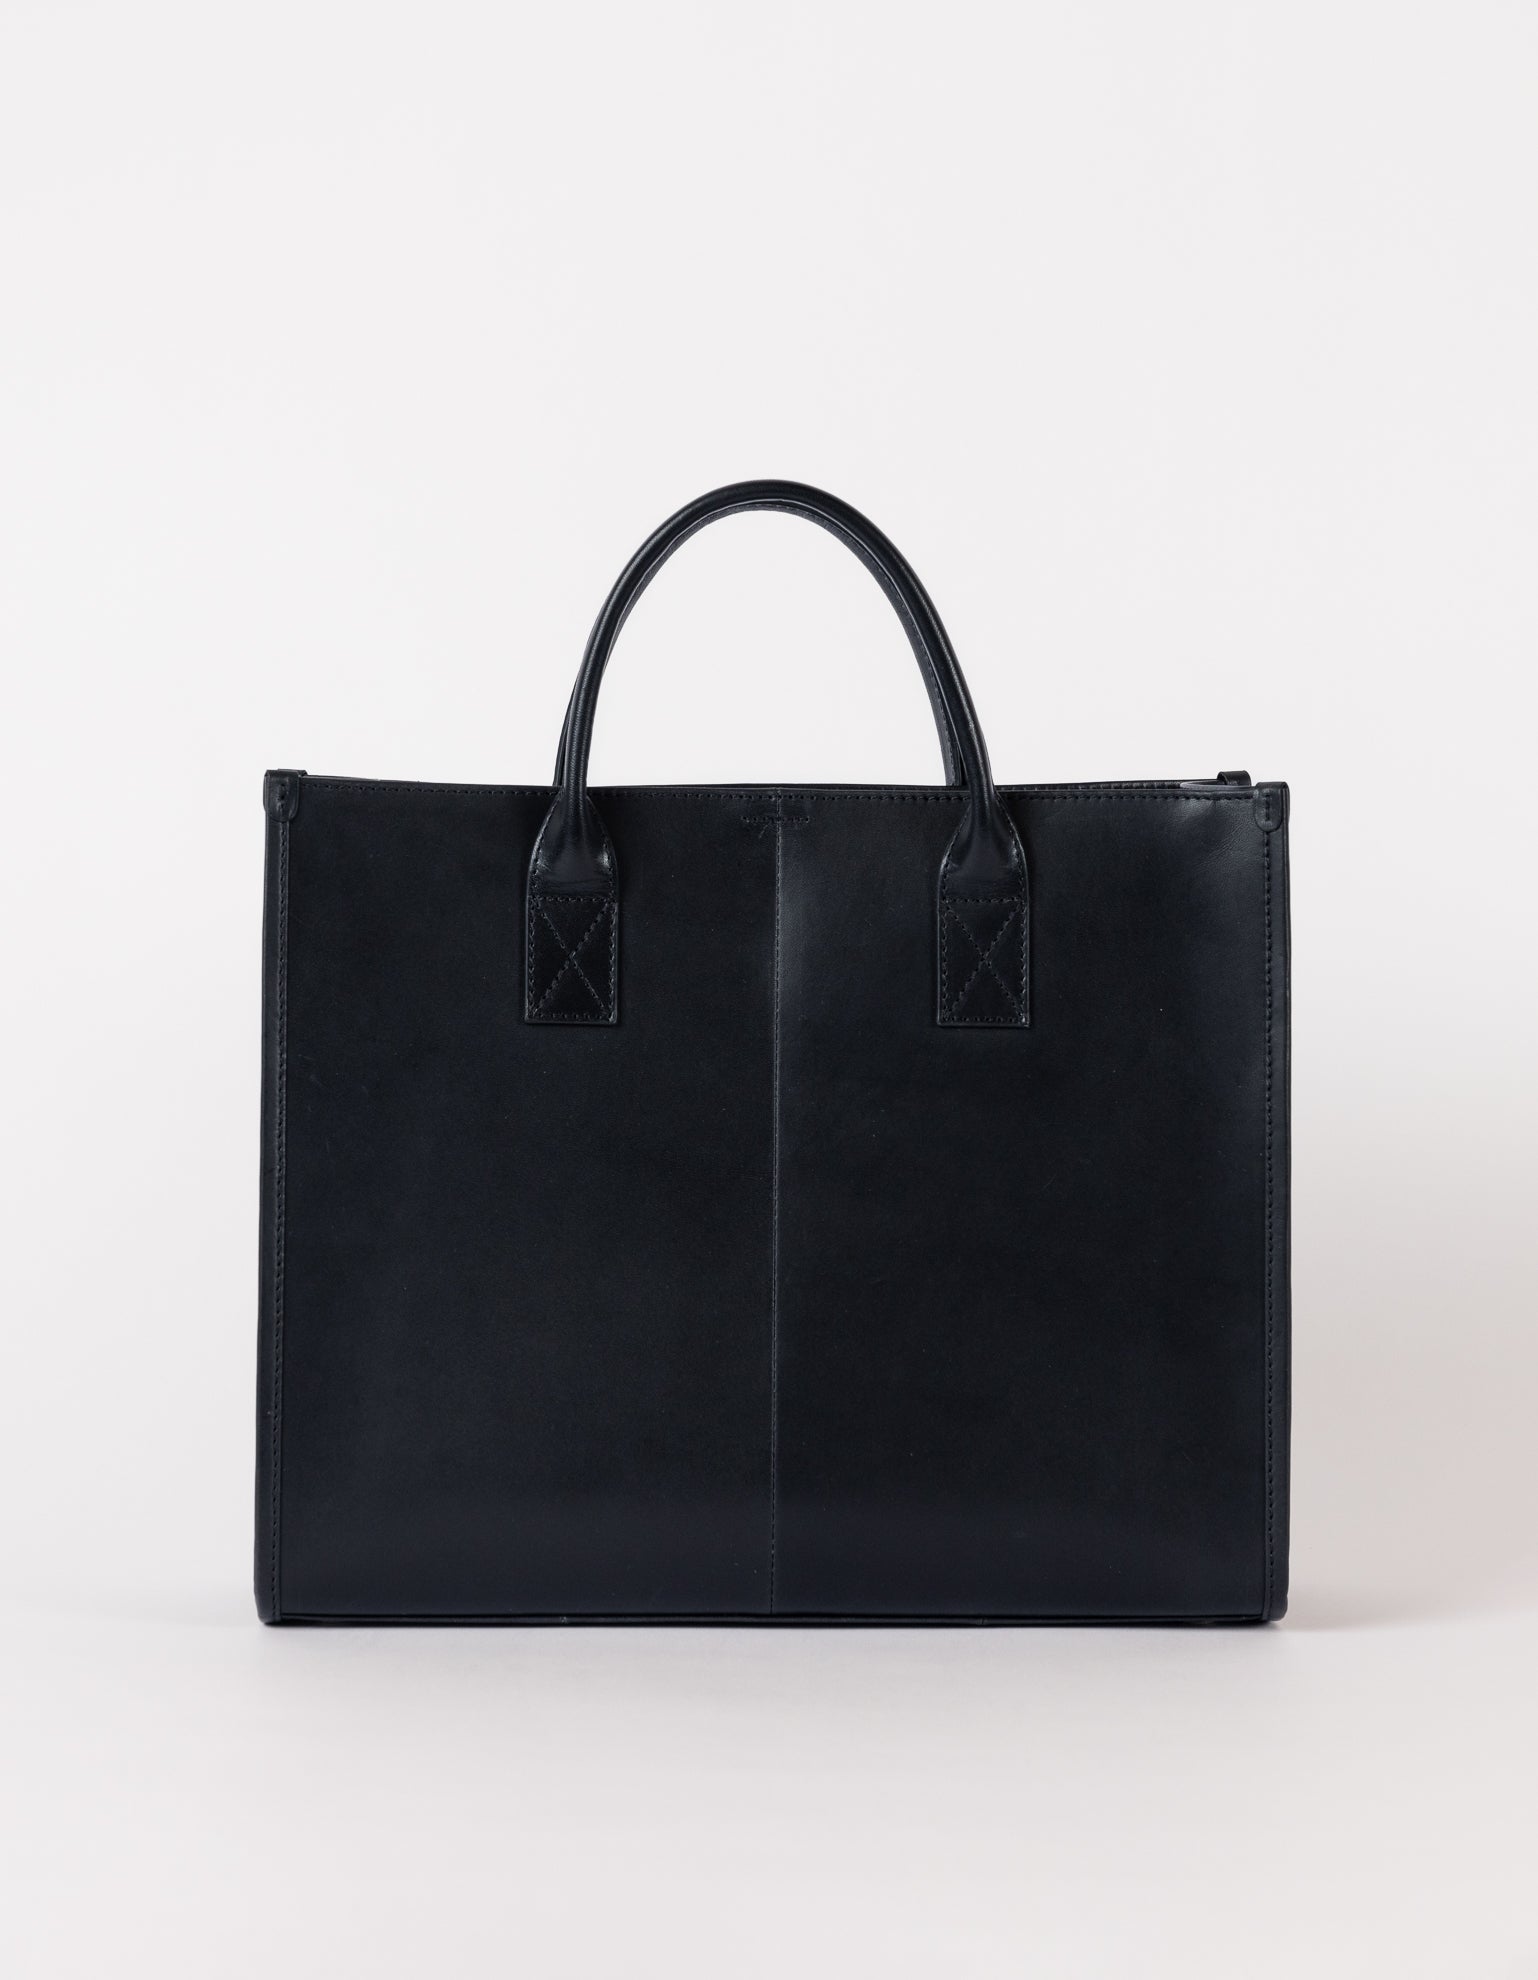 Rectangle shaped leather tote bag - back product image